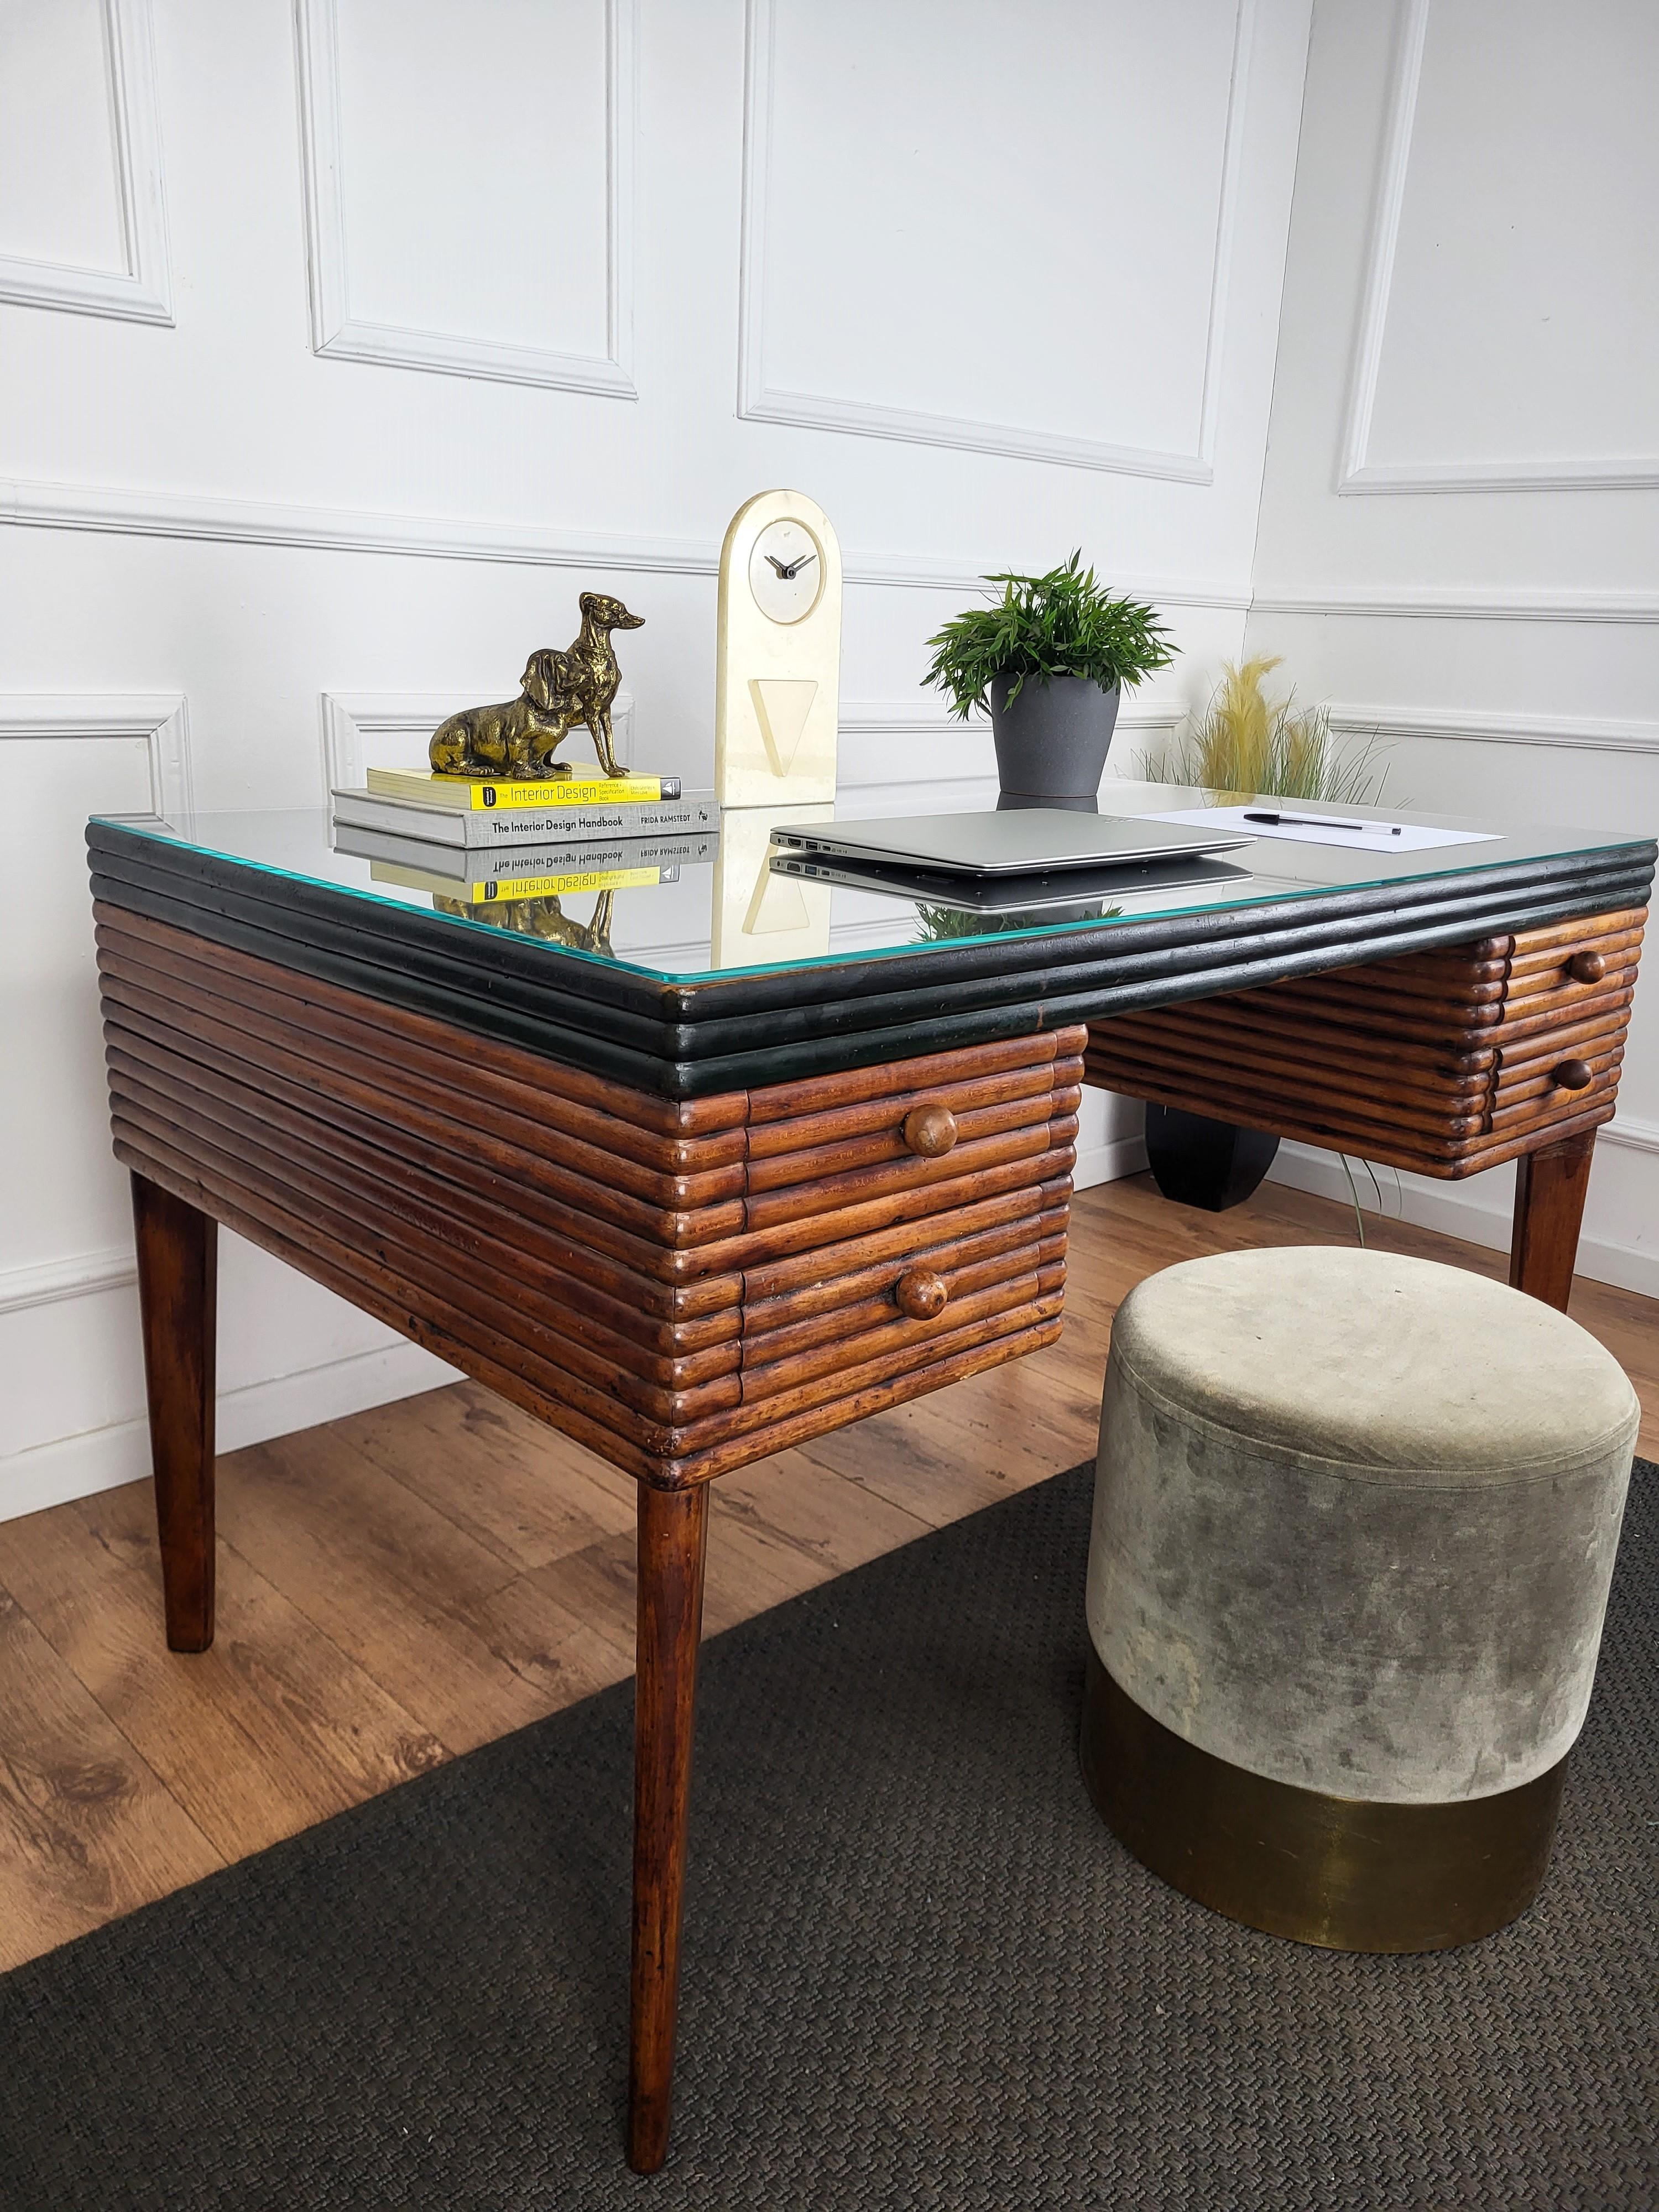 Very elegant Italian Art Deco Mid-Century Modern desk writing table, with beautiful side and front carved slats and side pair of drawers on each side, front and back, completed with its elegant glass top and detailed by the green paint decor. The